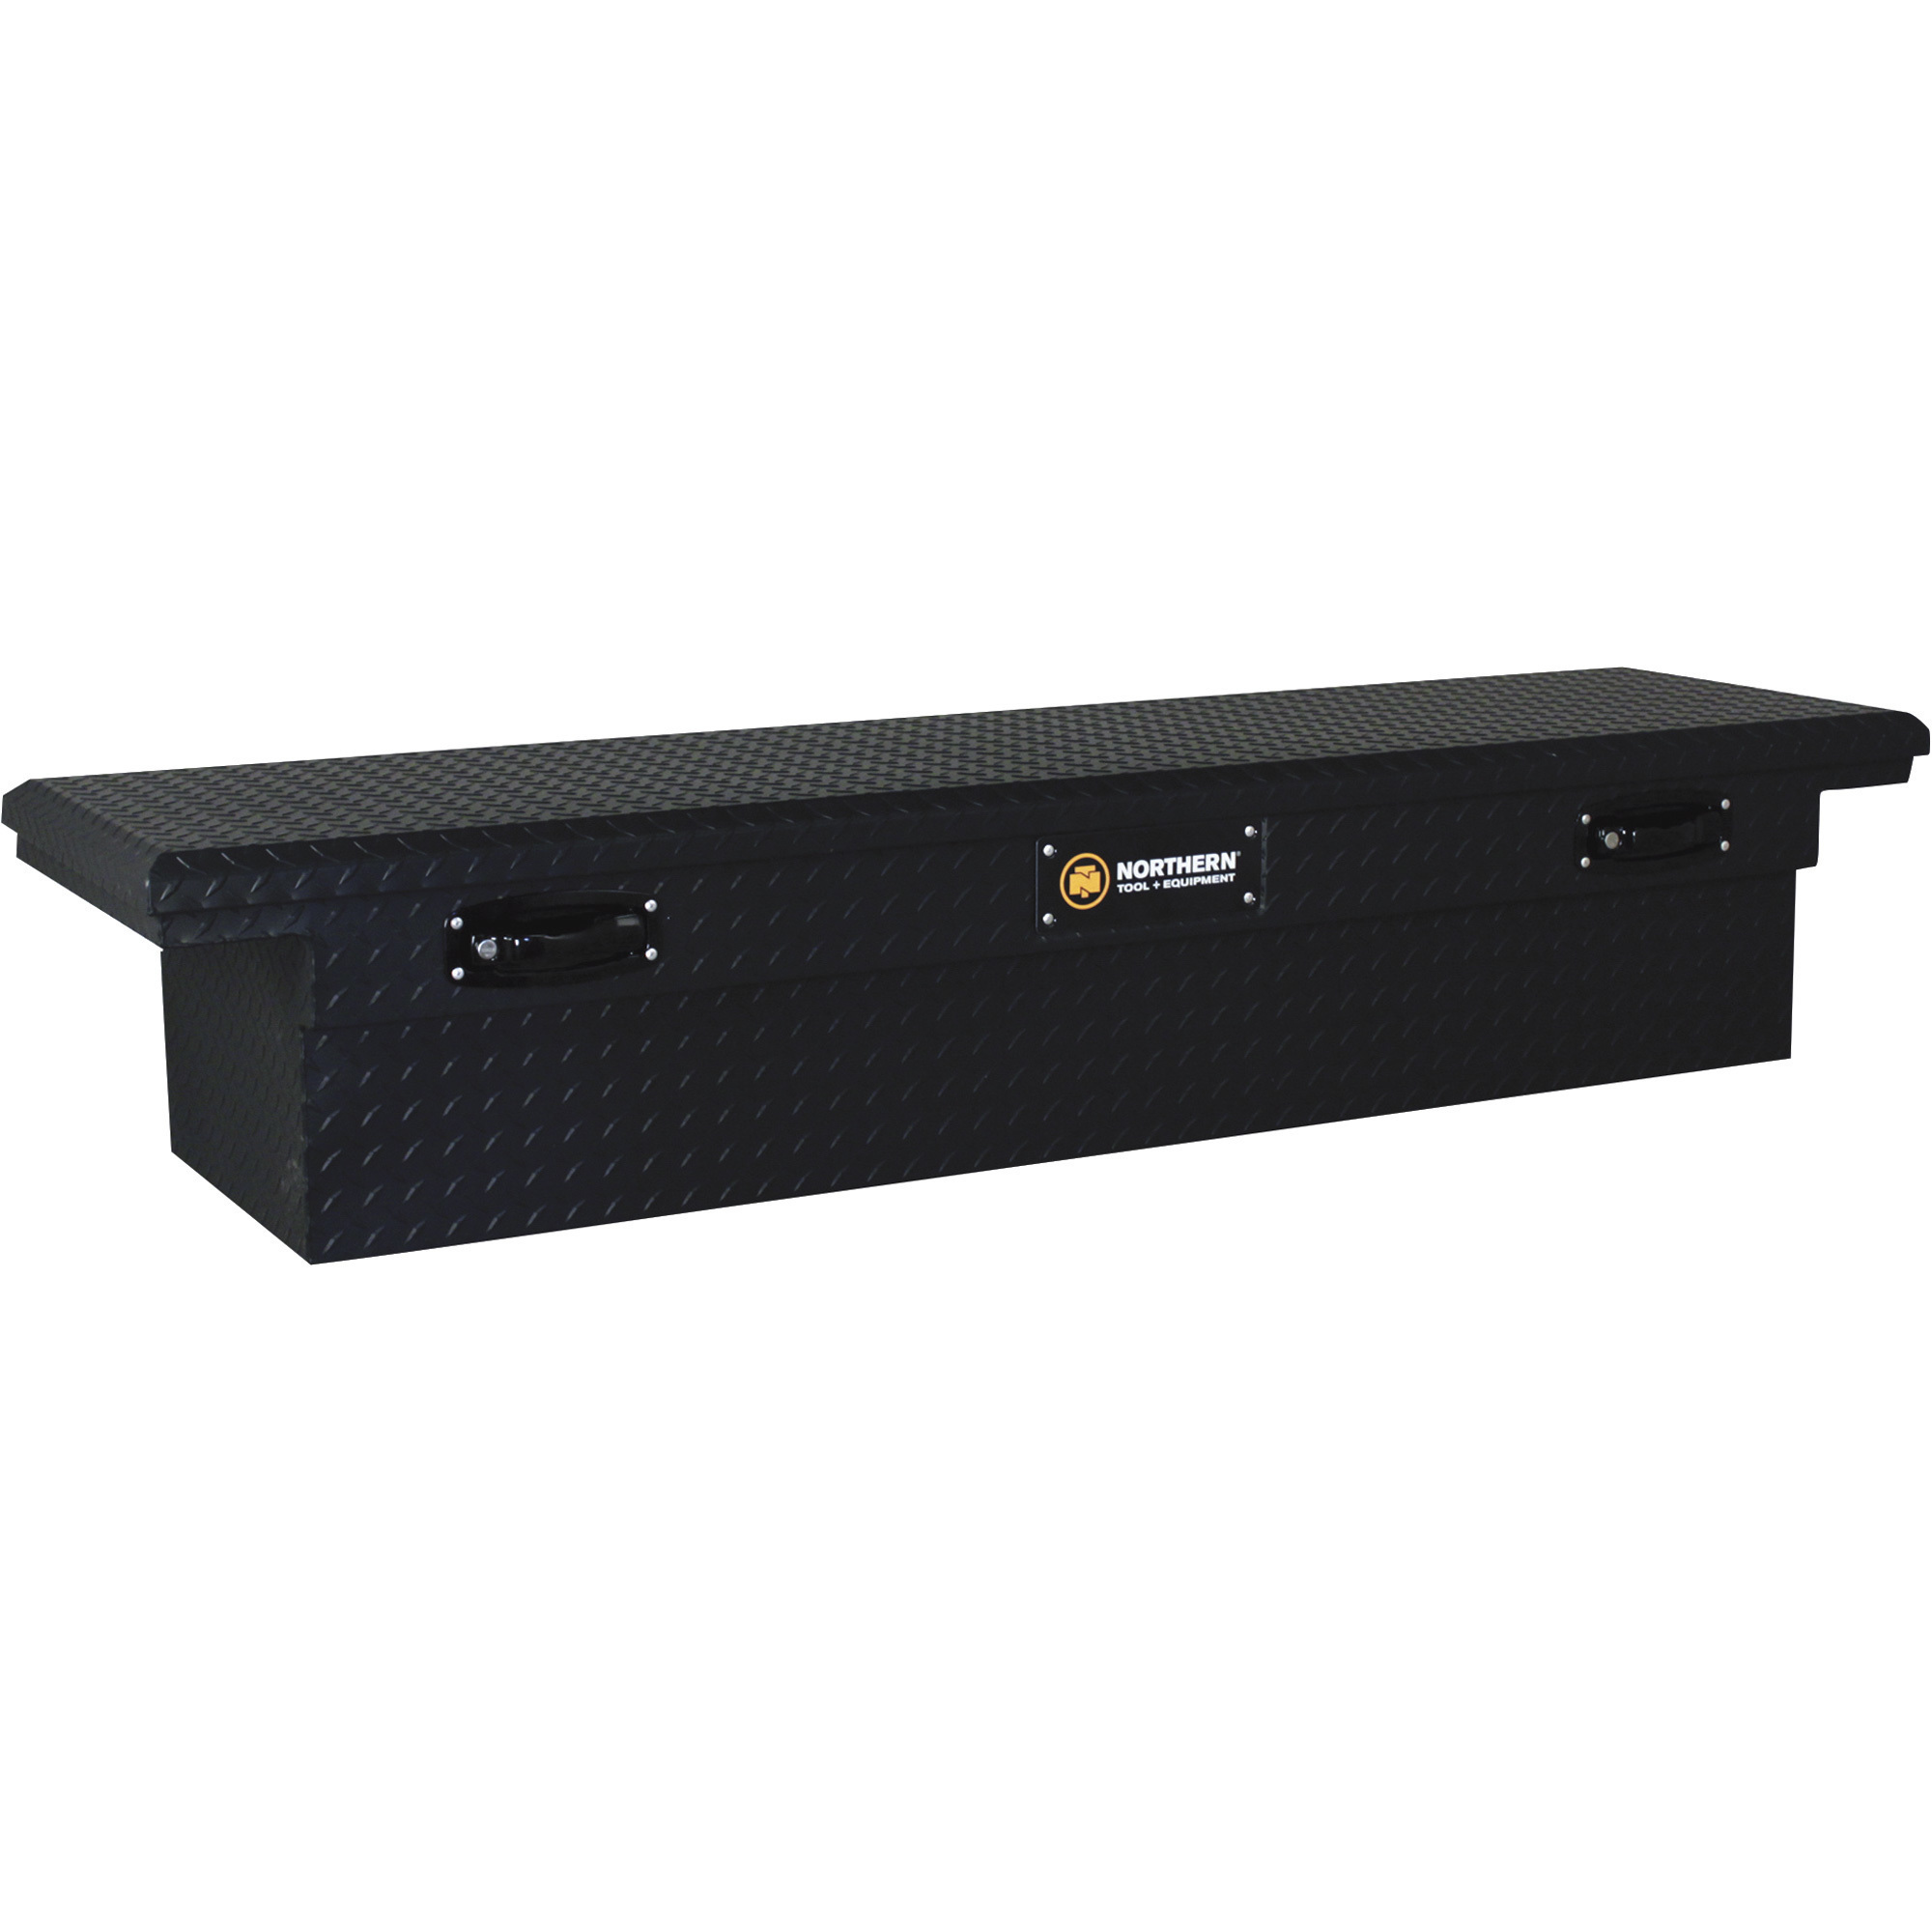 Northern Tool Low-Profile Crossover Truck Tool Box with Removable Tray,  Aluminum, Textured Matte Black, Pull Handle Latches, 69in. x 20in. x 13in.,  Model# 36212727